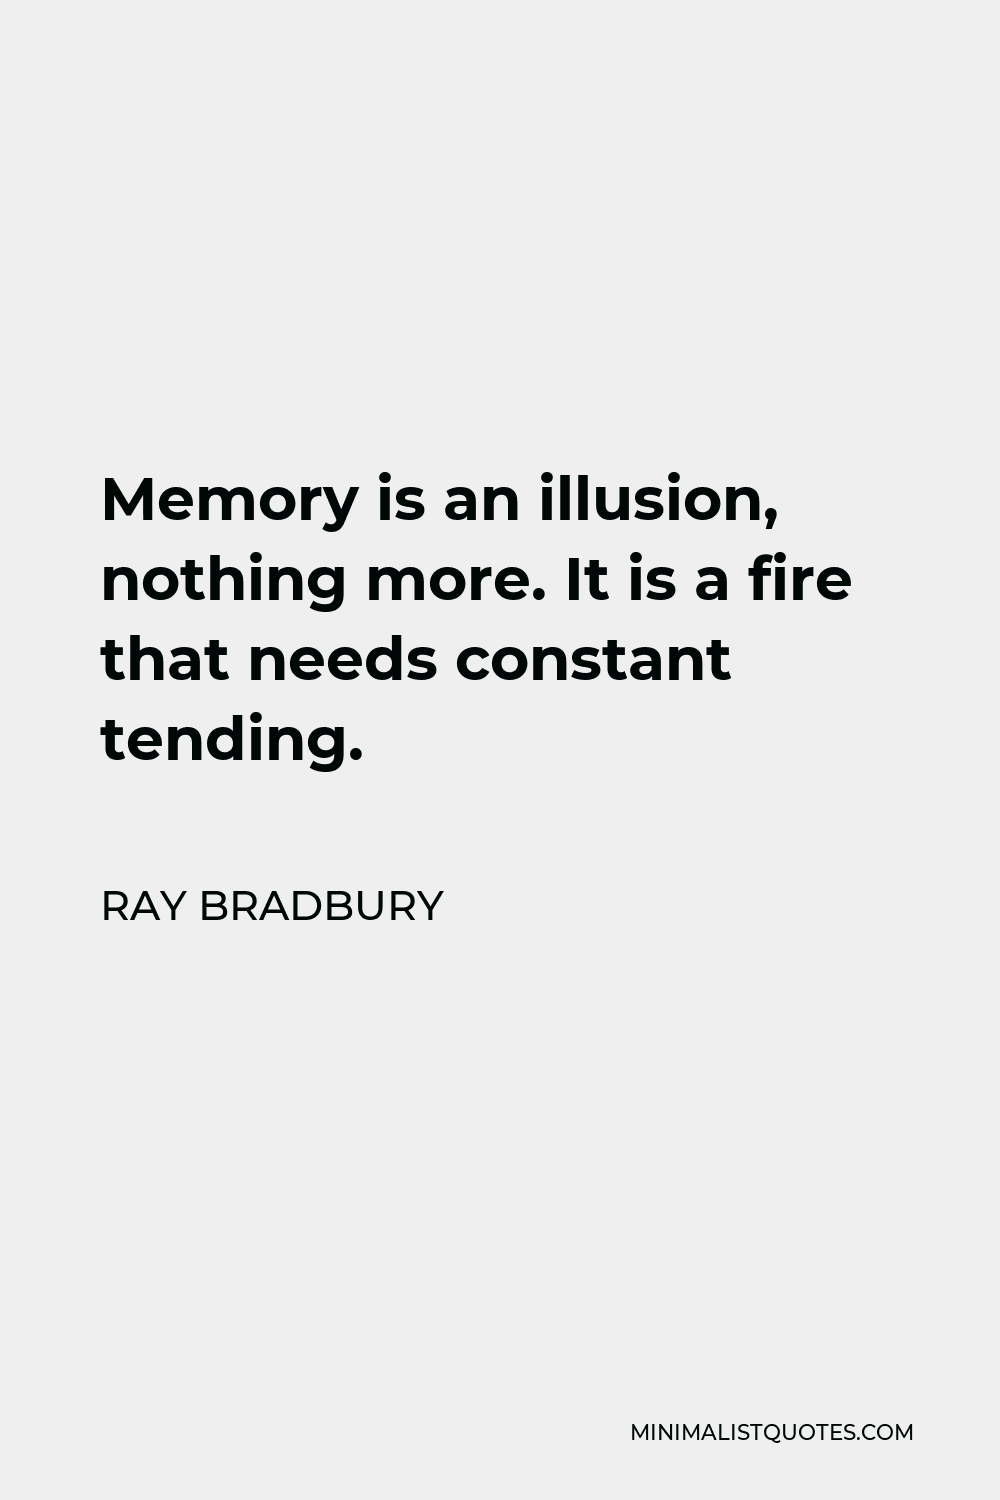 Ray Bradbury Quote - Memory is an illusion, nothing more. It is a fire that needs constant tending.